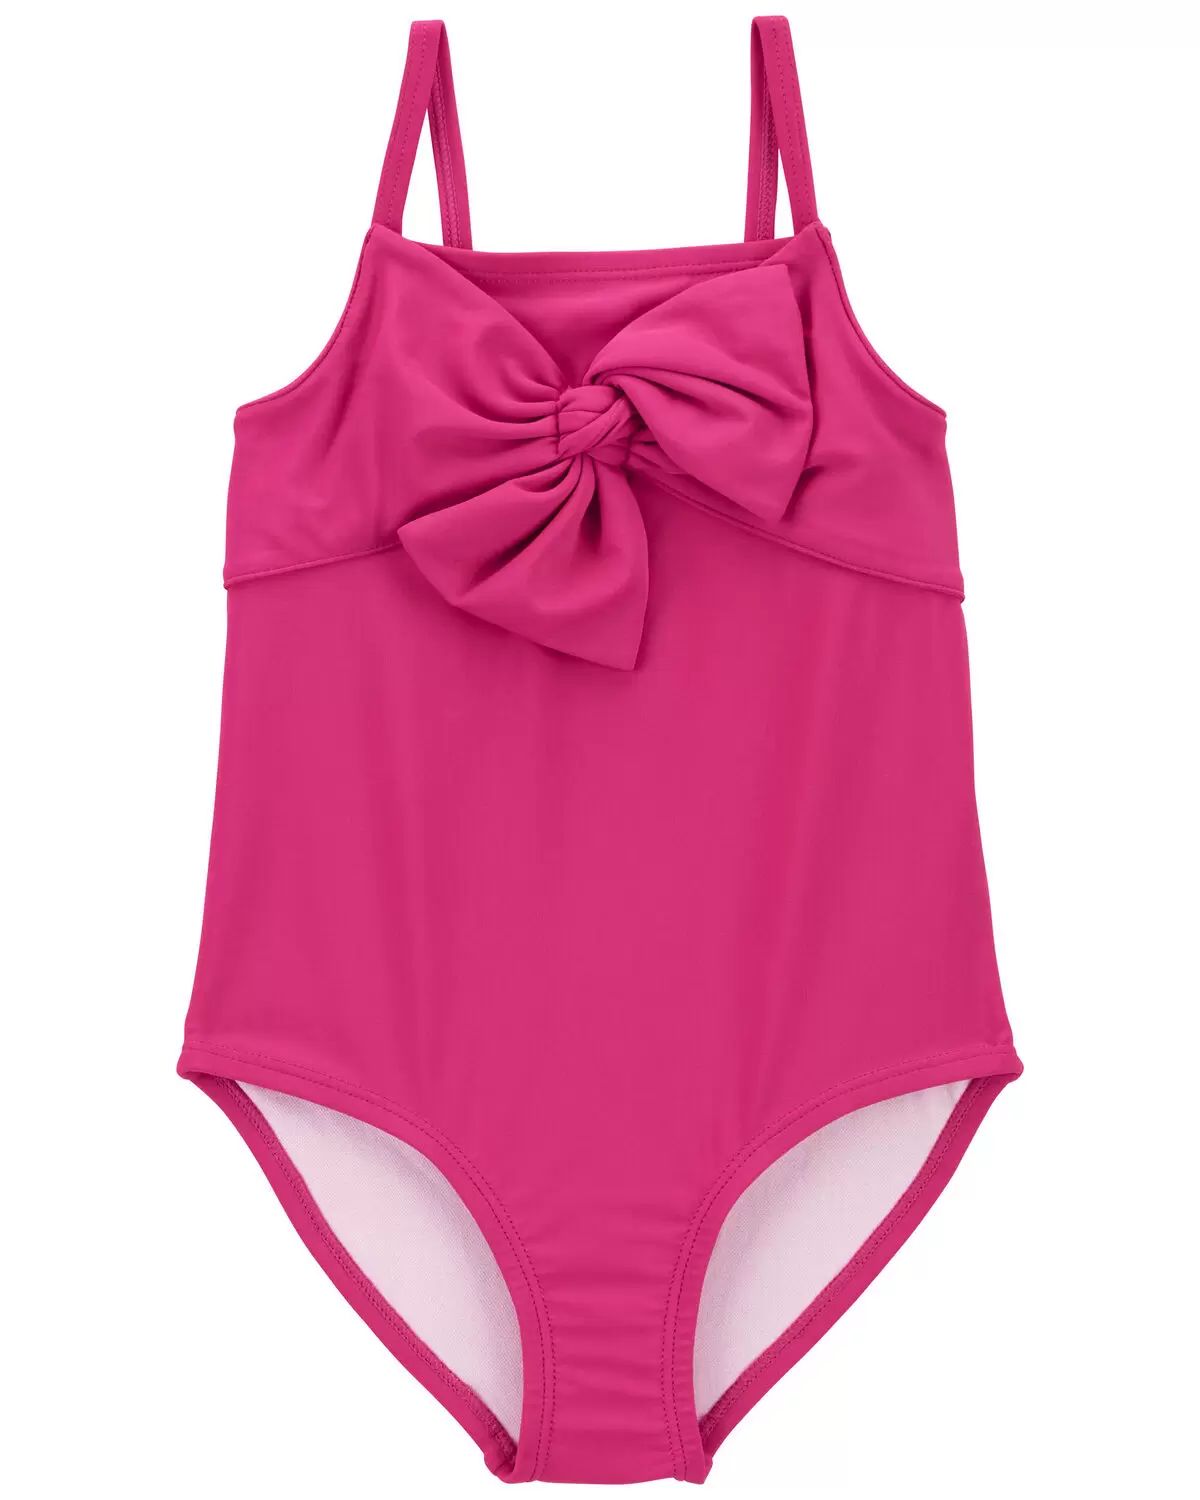 Toddler Bow 1-Piece Swimsuit | Carter's